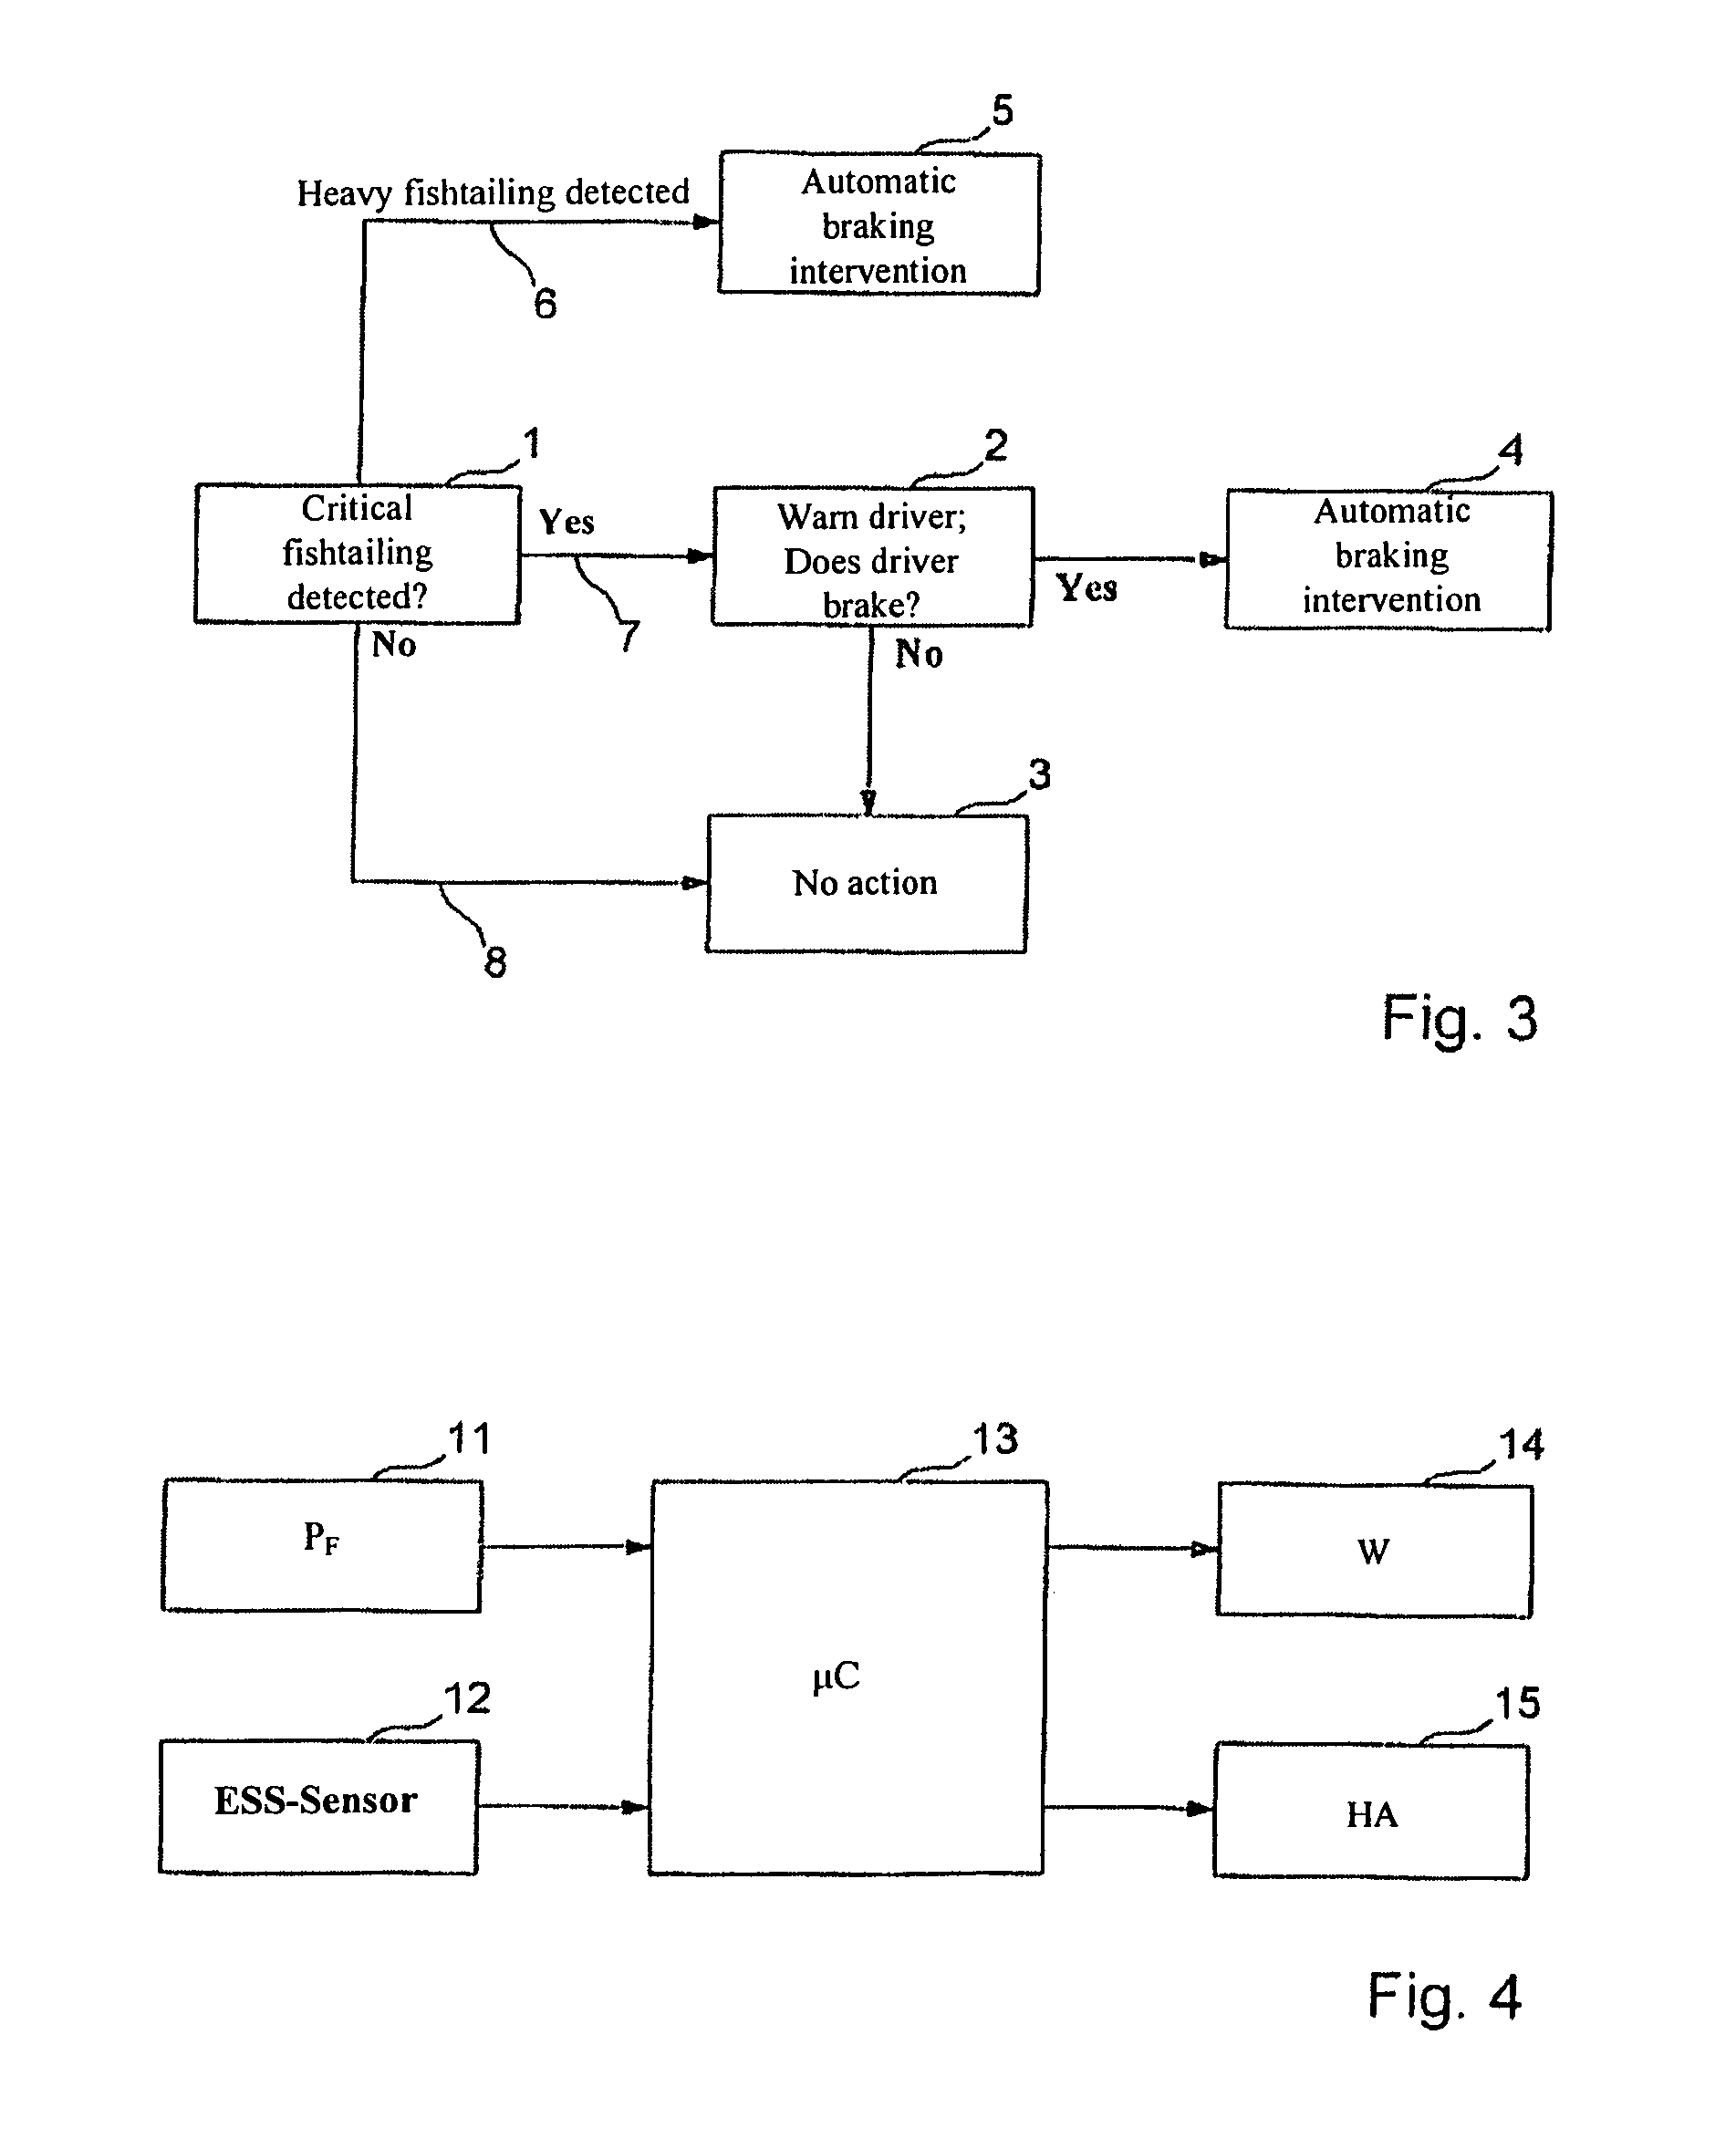 Method for assisting the driver of a motor vehicle with a fishtailing trailer